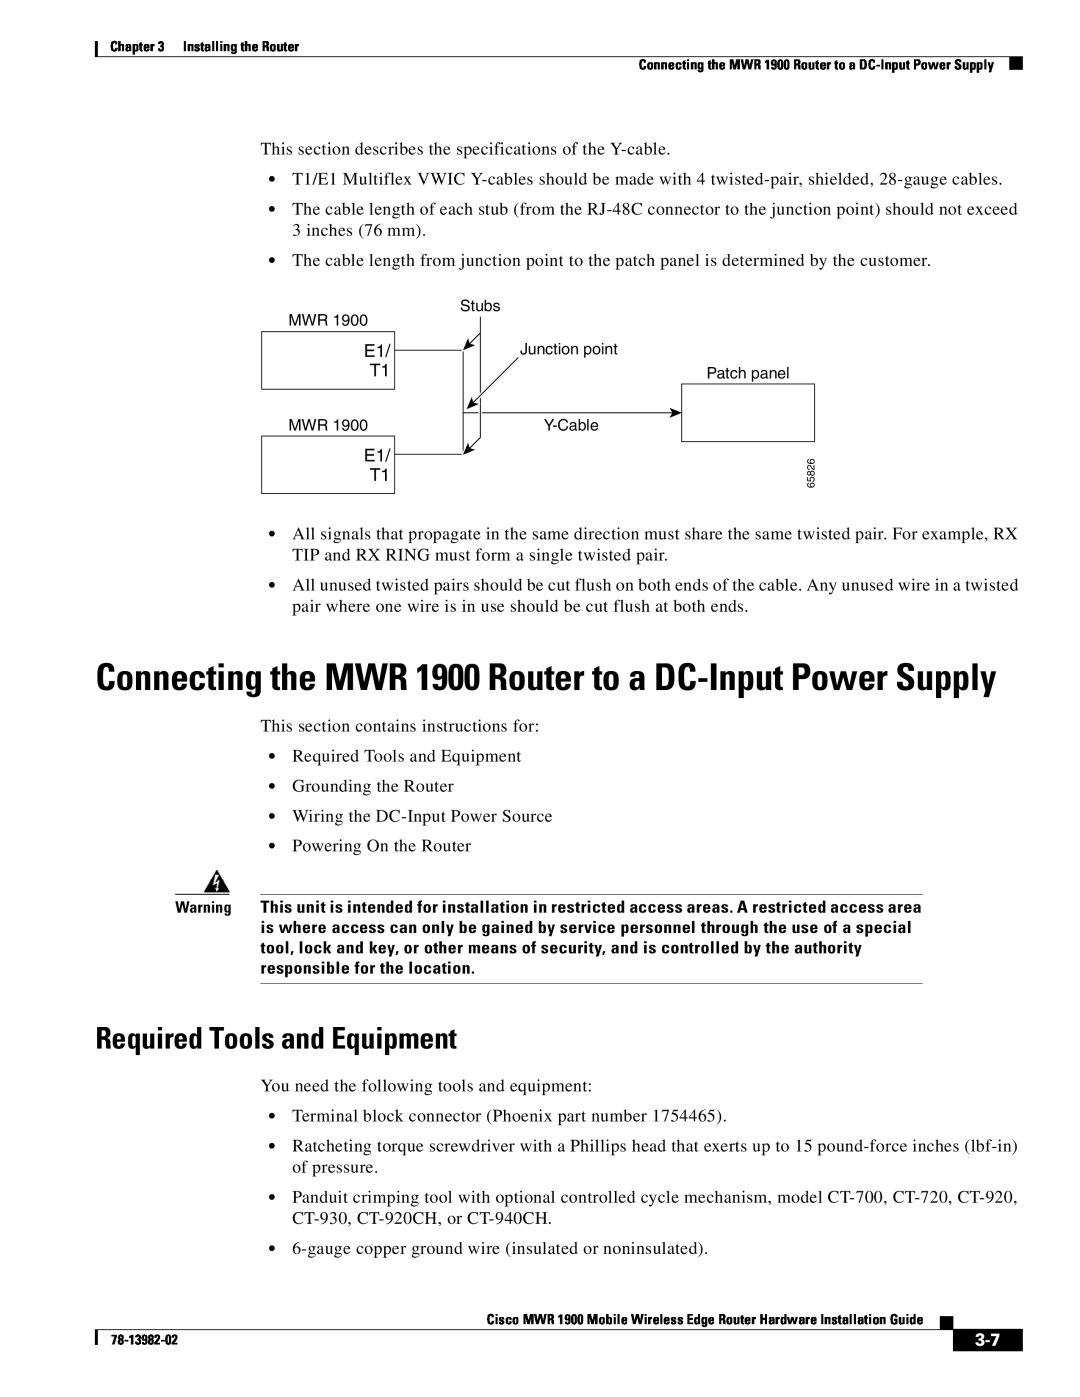 Cisco Systems manual Required Tools and Equipment, Connecting the MWR 1900 Router to a DC-Input Power Supply 